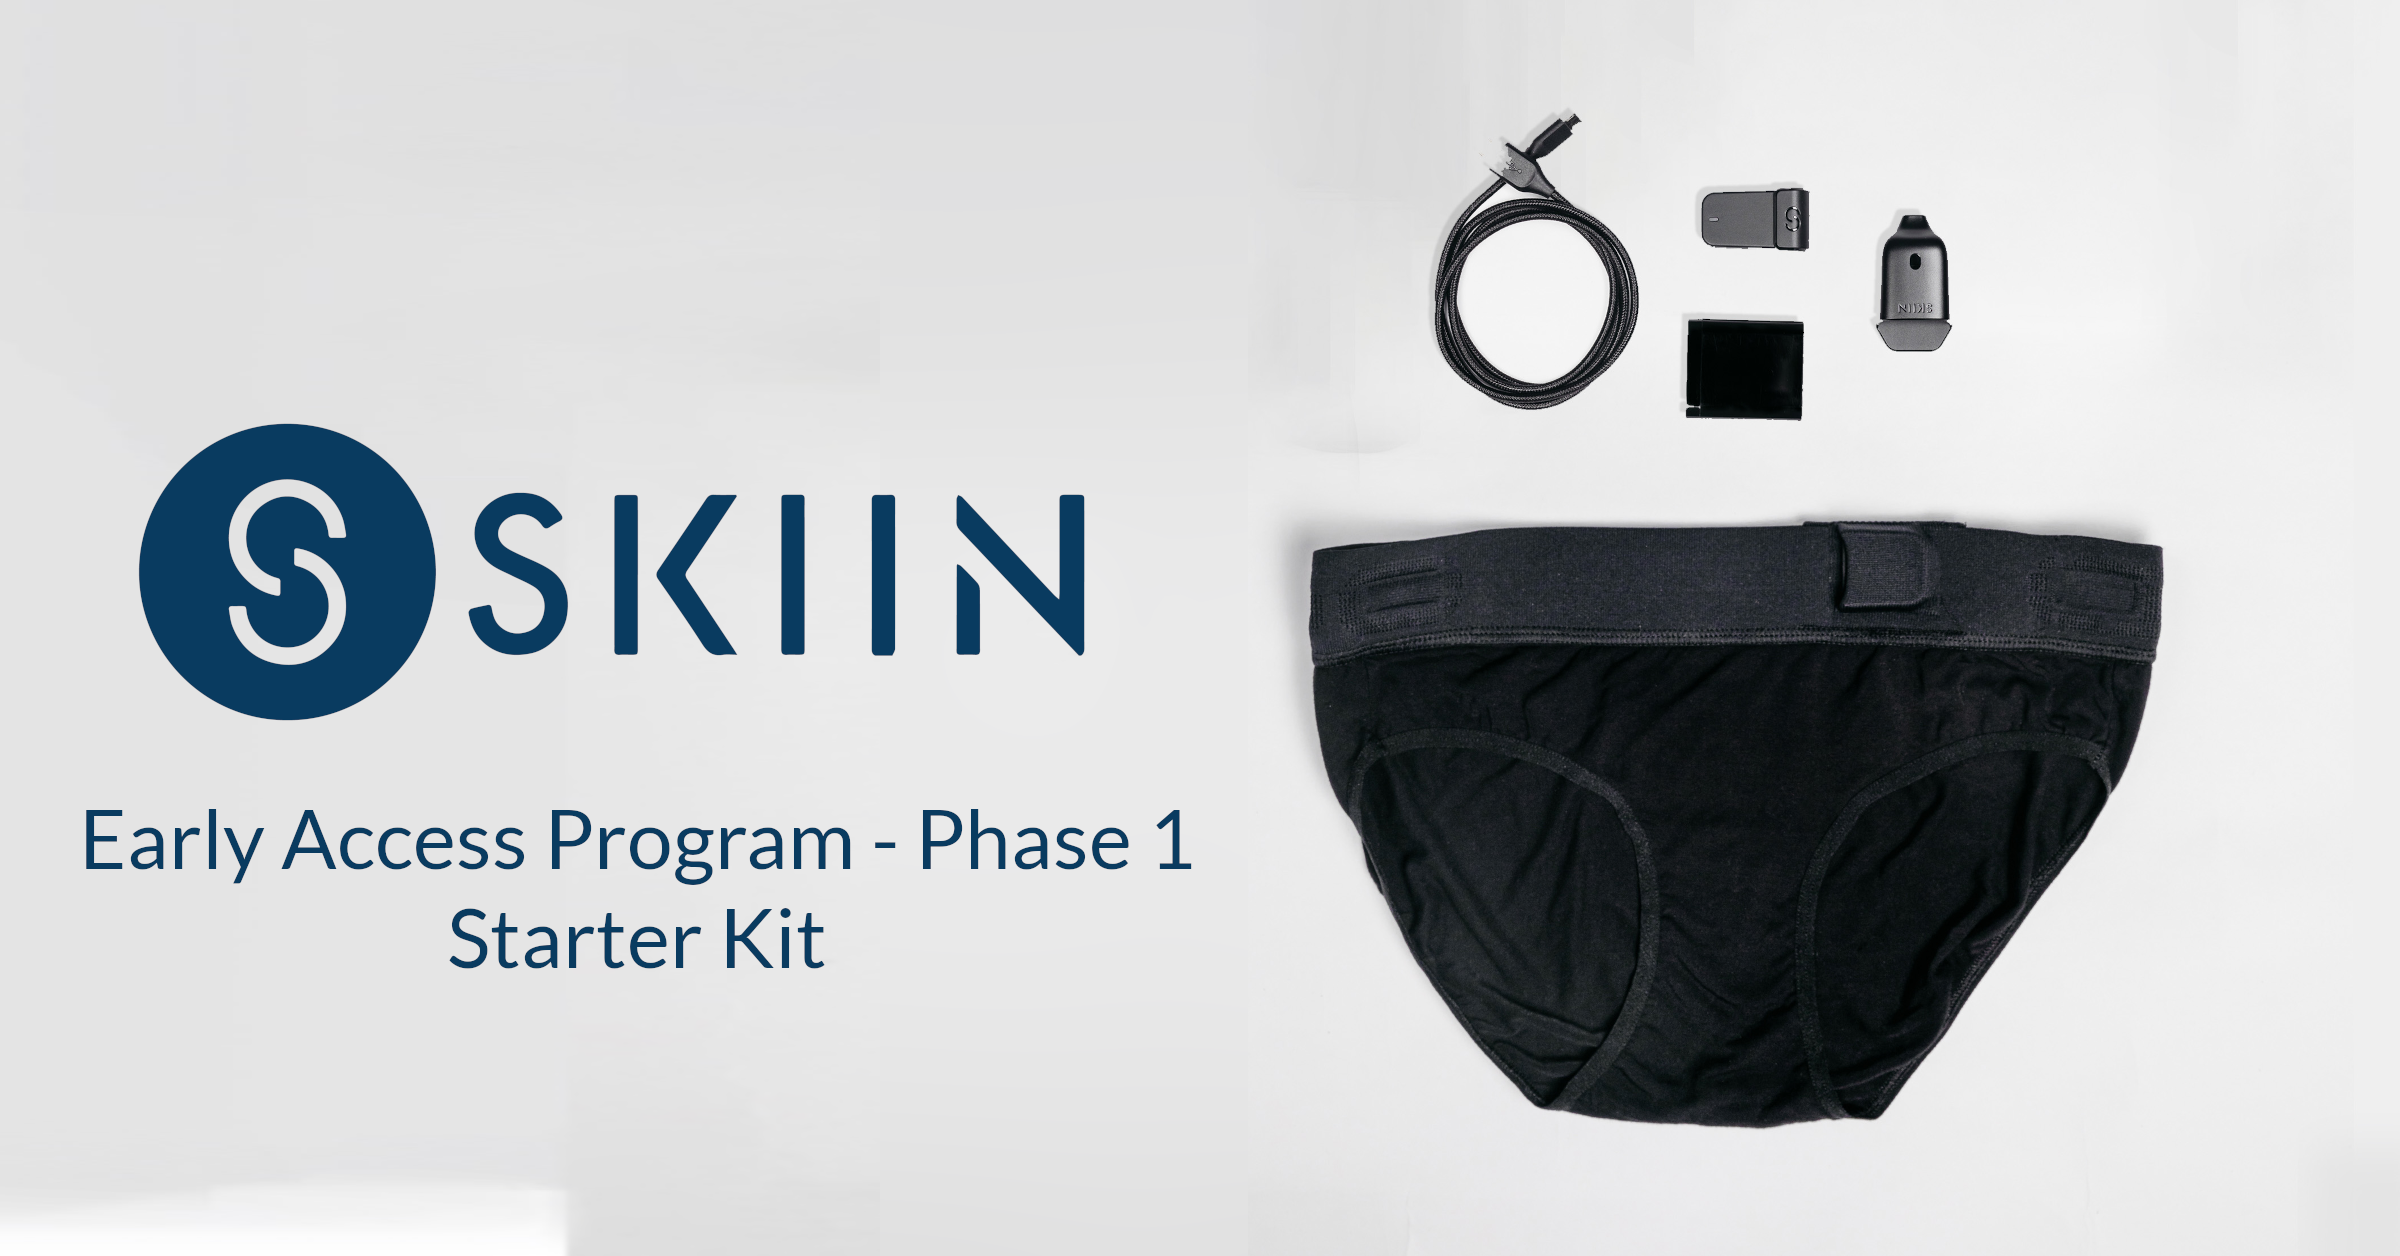 Contents of the Skiin EAP - Phase 1 Starter Kit including underwear, pod, and charging kit